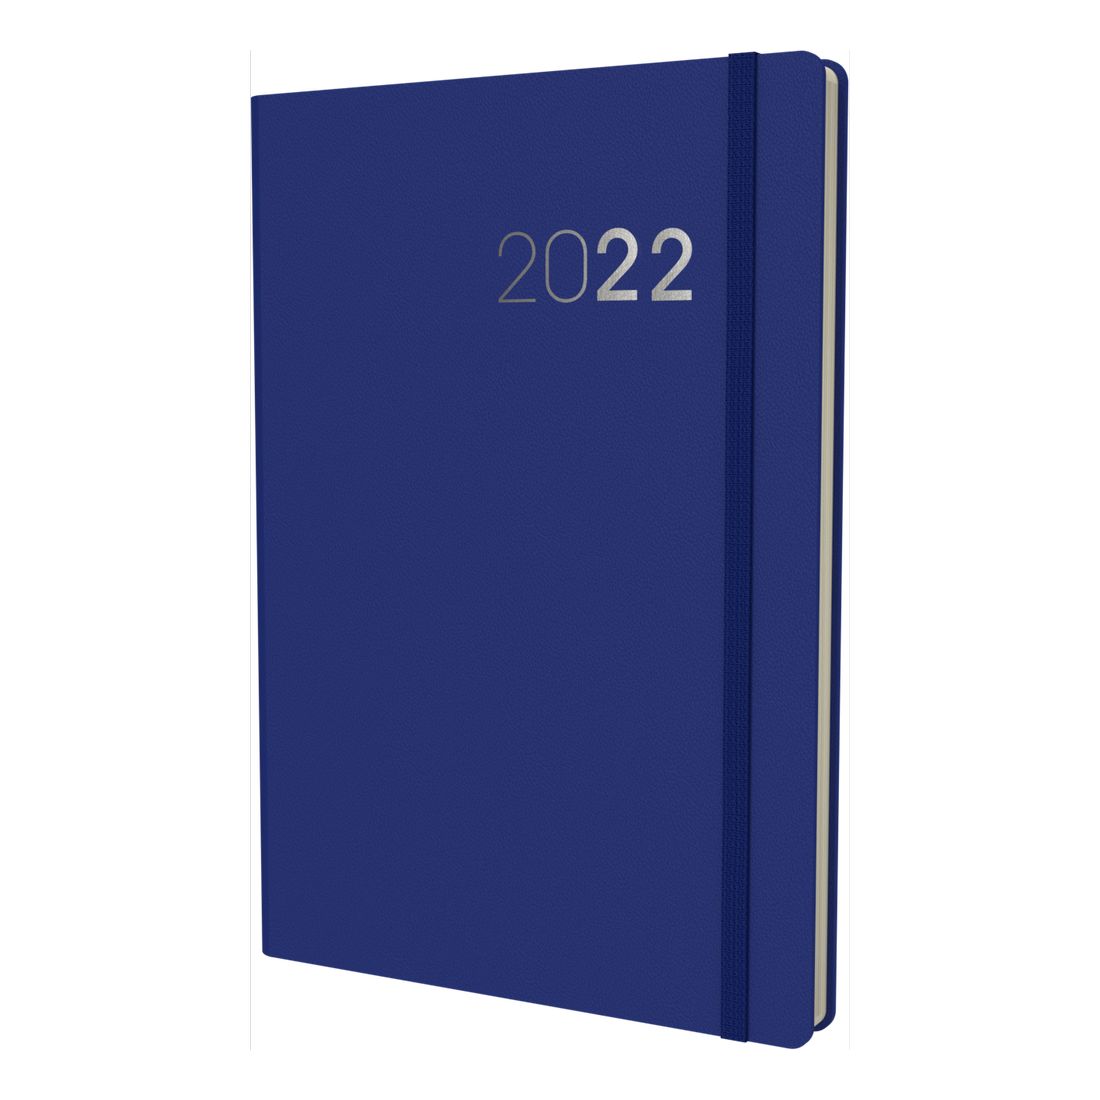 Collins Debden Legacy A5 Week To View Diary 2022 Blue